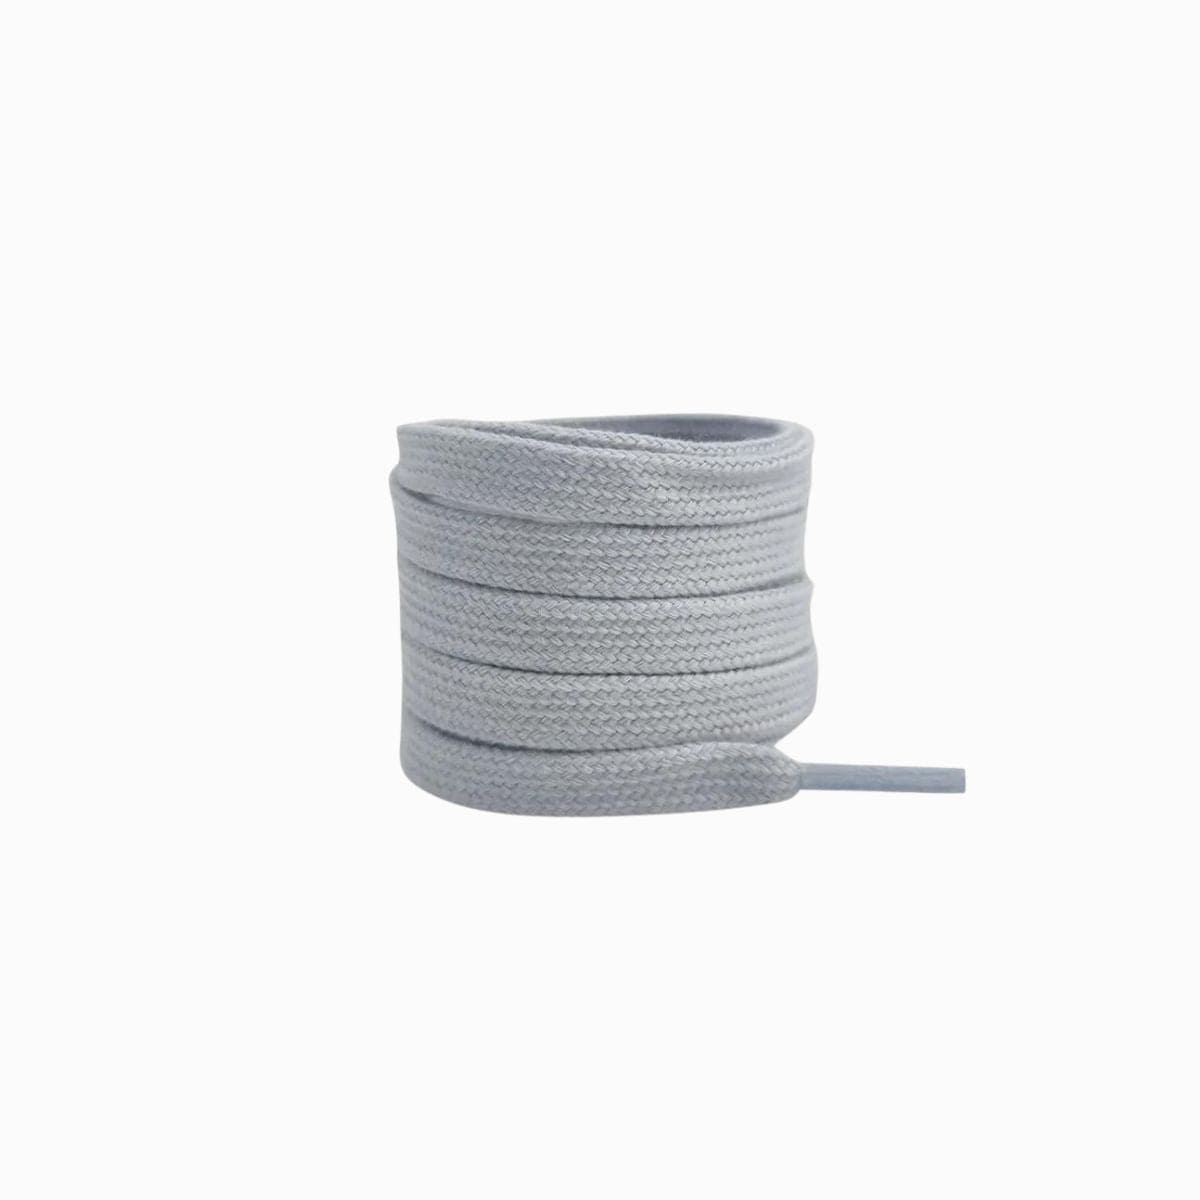 Grey Replacement Adidas Shoe Laces for Adidas Samba OG Sneakers by Kicks Shoelaces